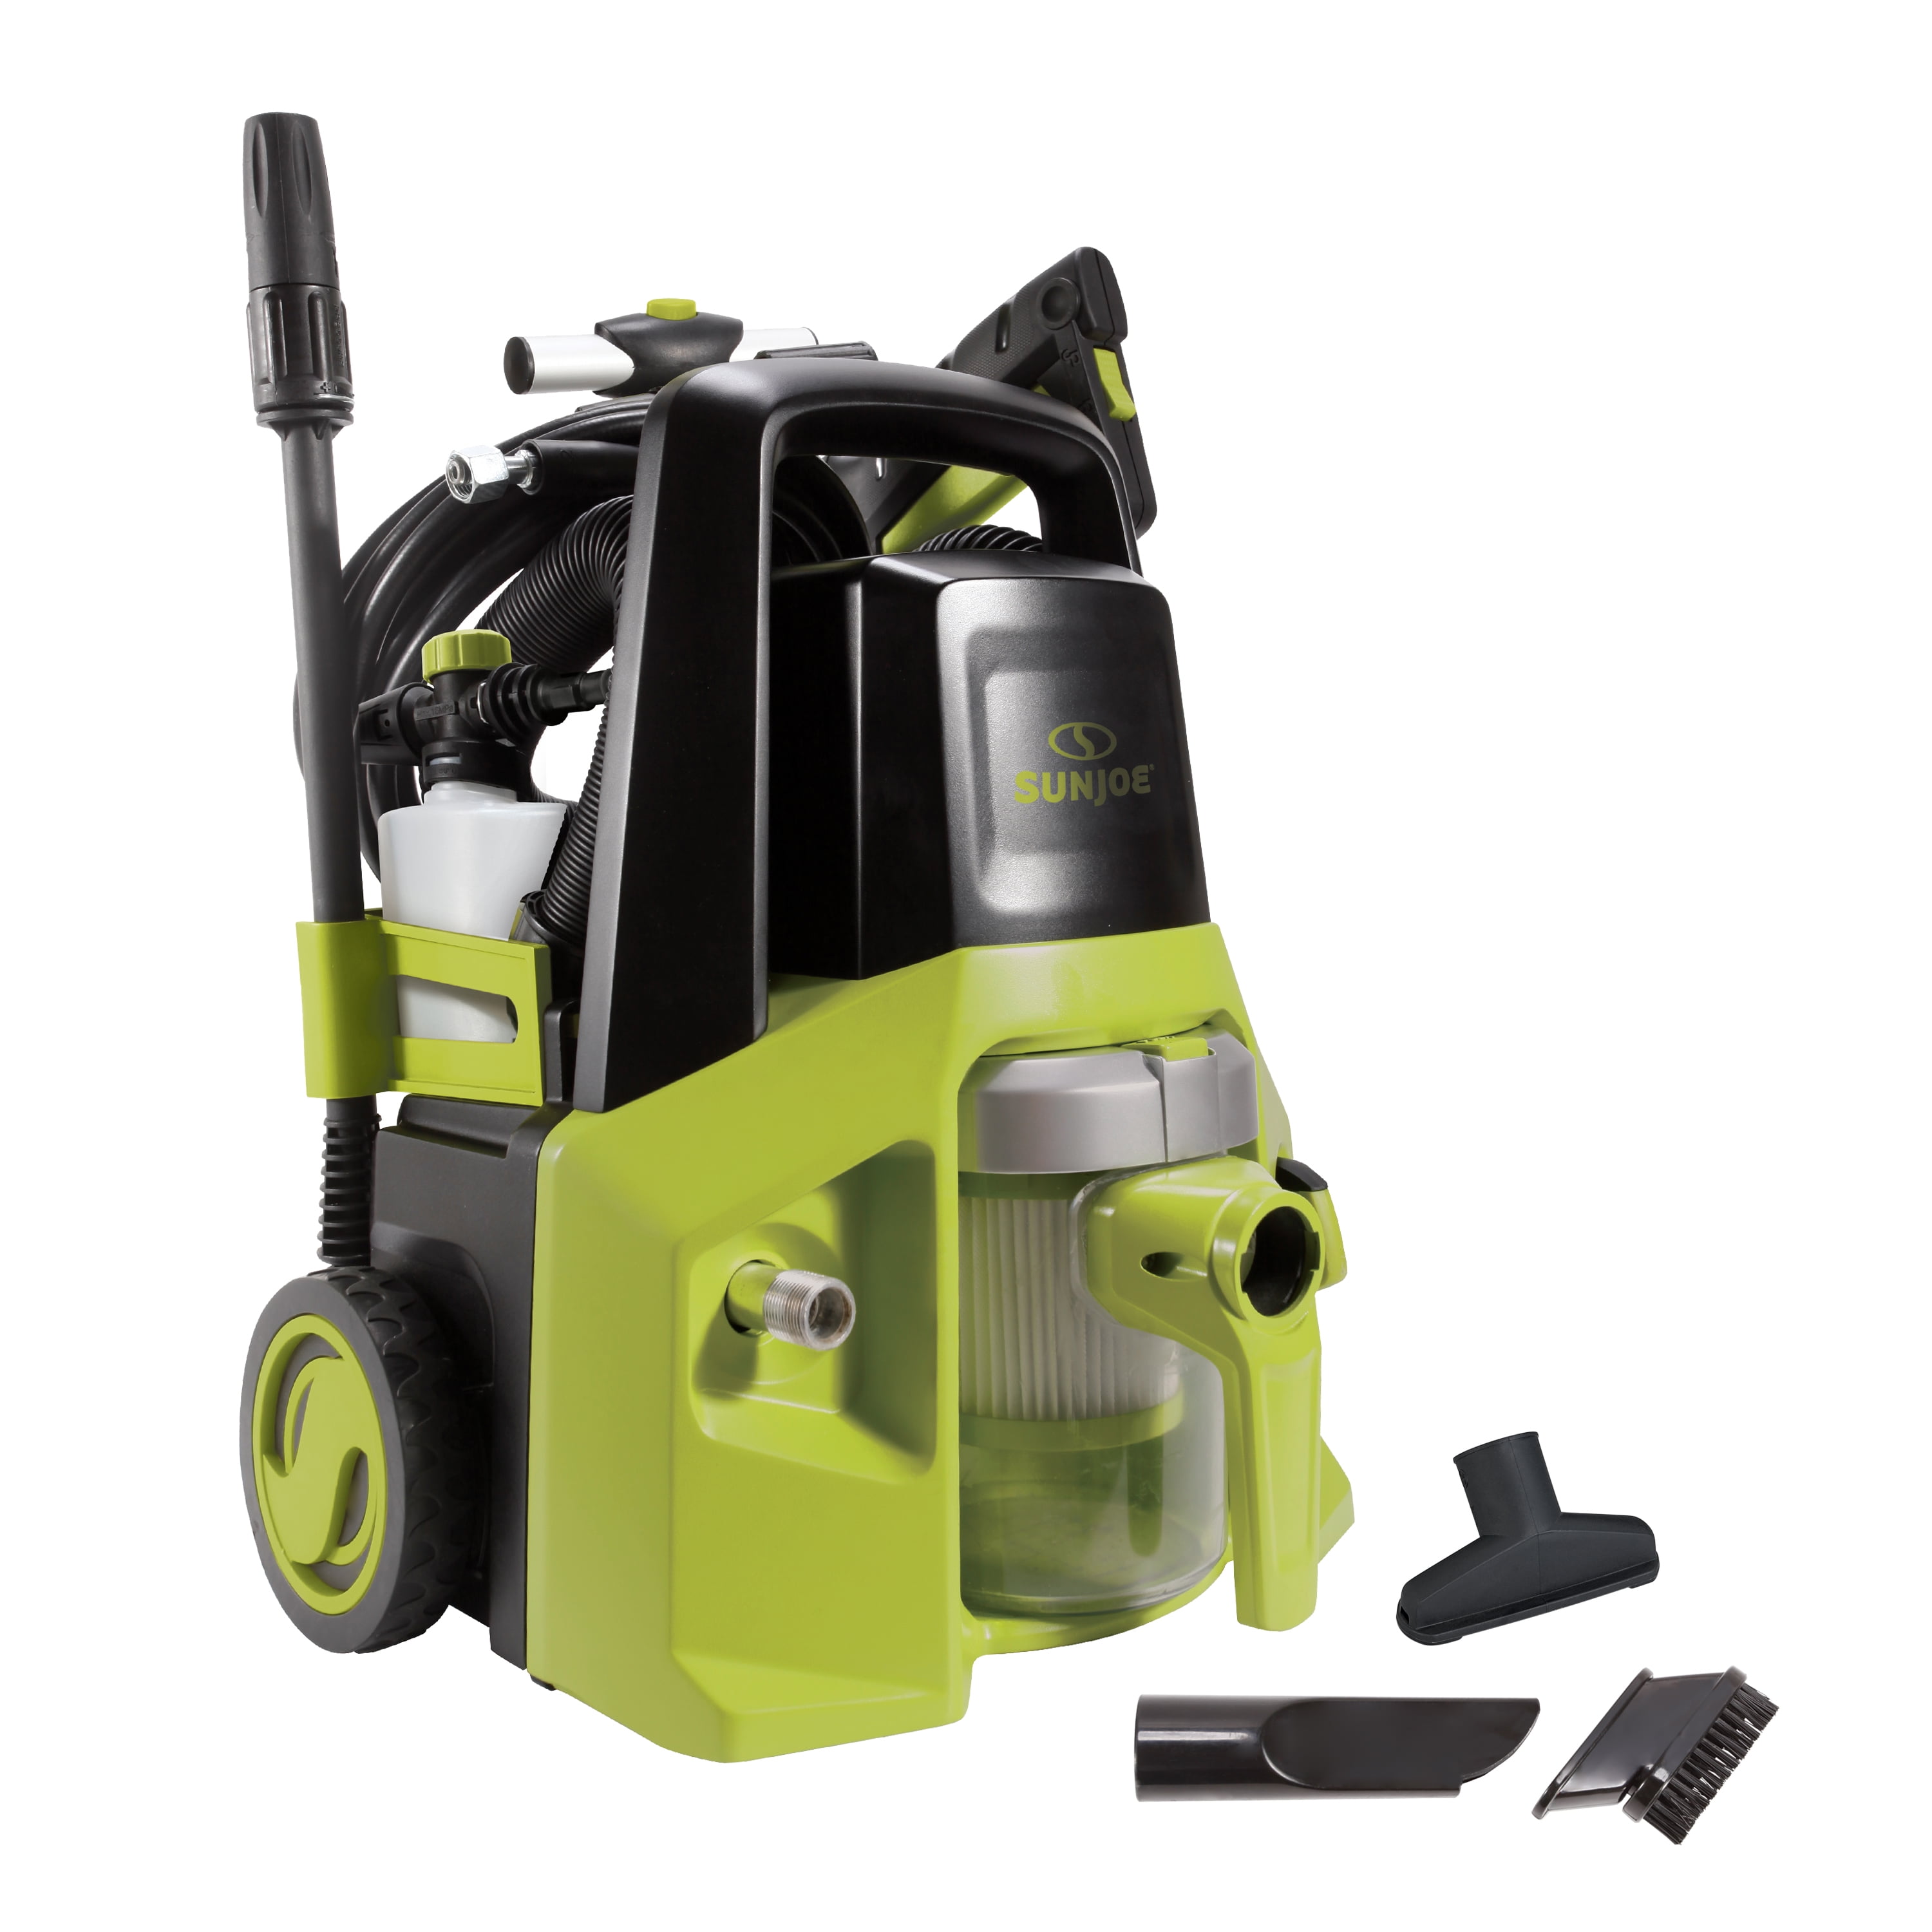 BEAST 2000 PSI 1.5 GPM Electric Pressure Washer for sale online 